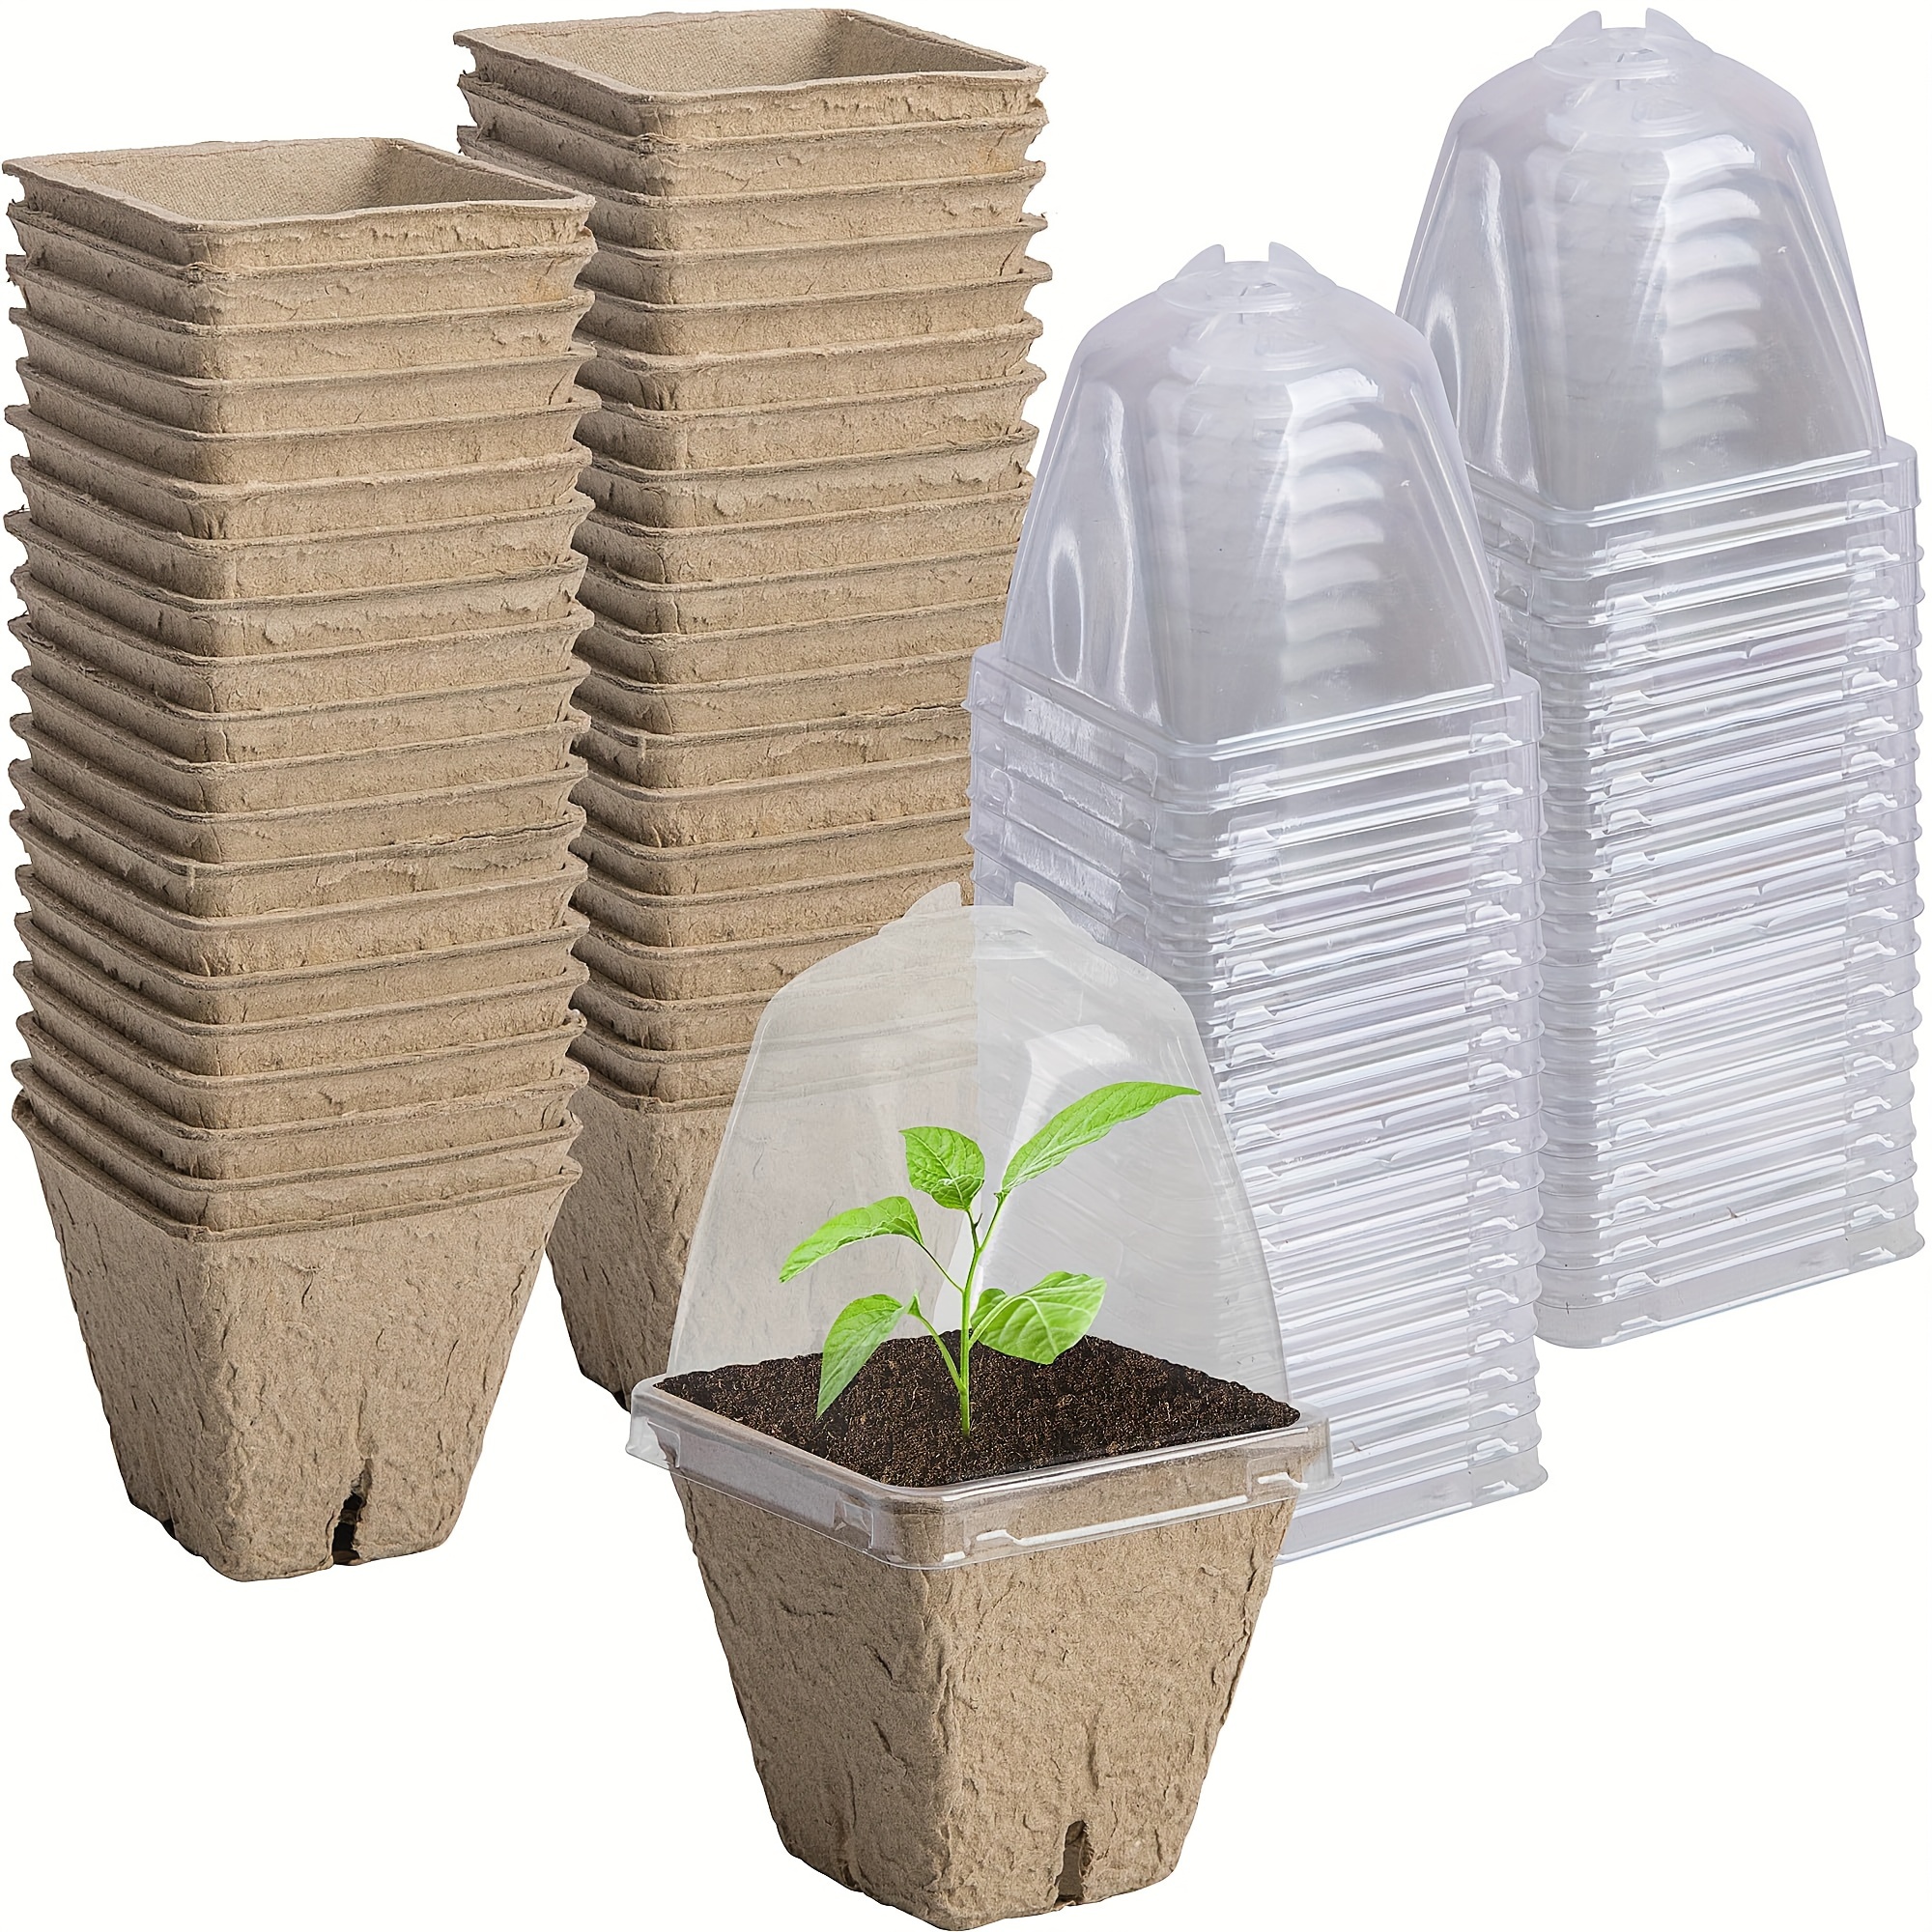 

40 Pcs Seeding Starter Pots For Planting- 2.3 Inch Square Biodegradable Nursery Pots With Humidity Dome- Peat Pots For Seedlings Garden Vegetable Flower Germination